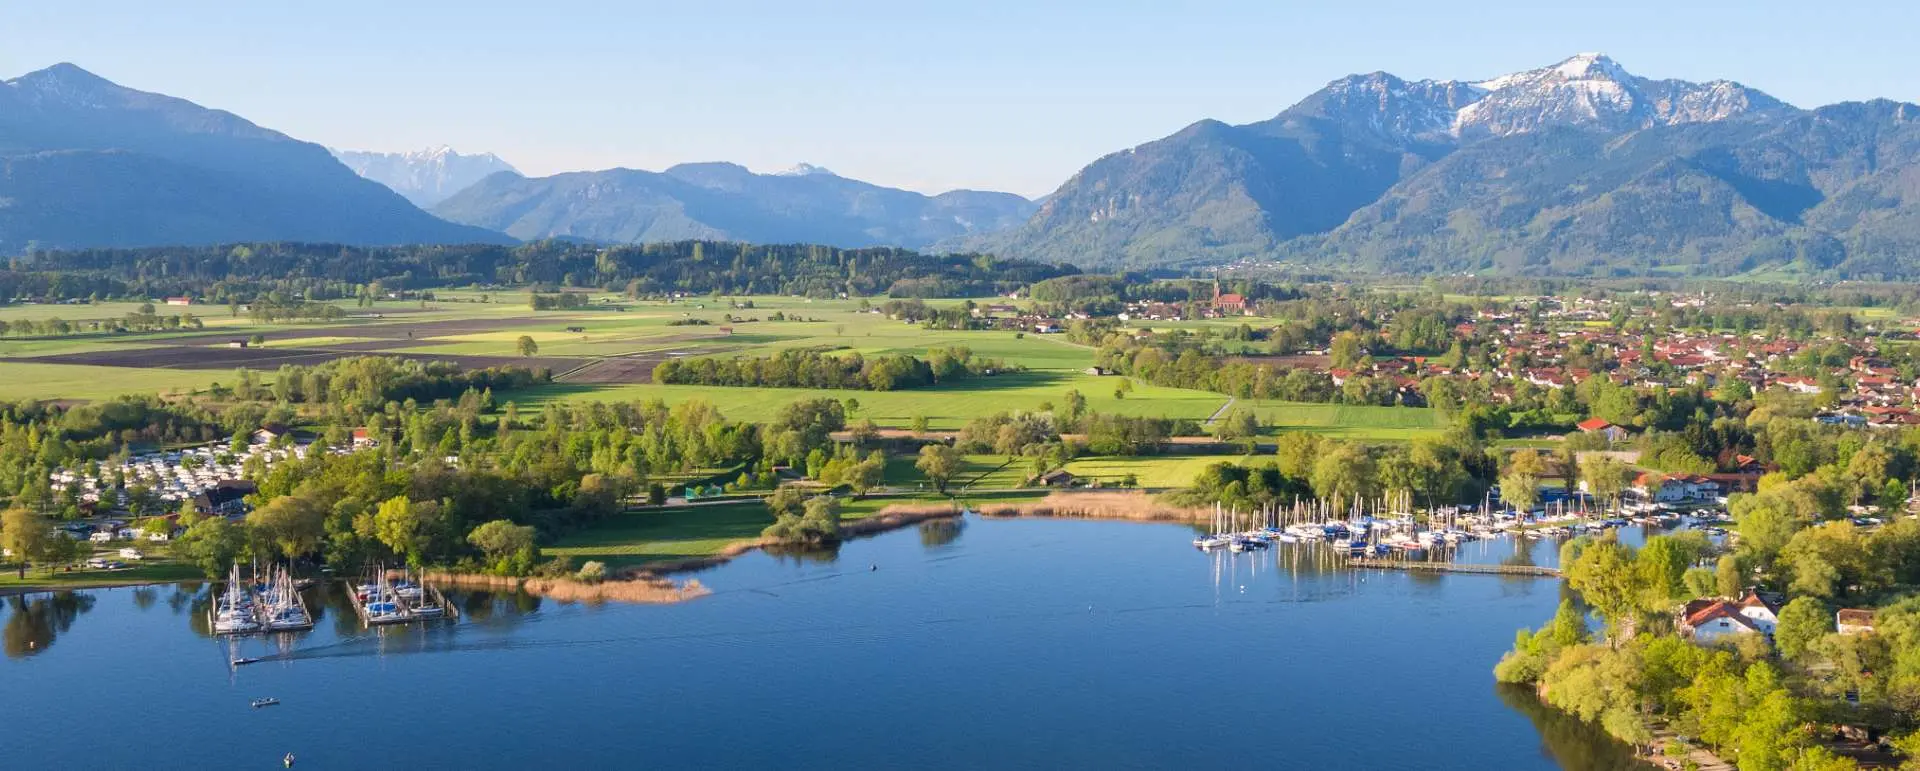 Chiemsee - the destination for athletes